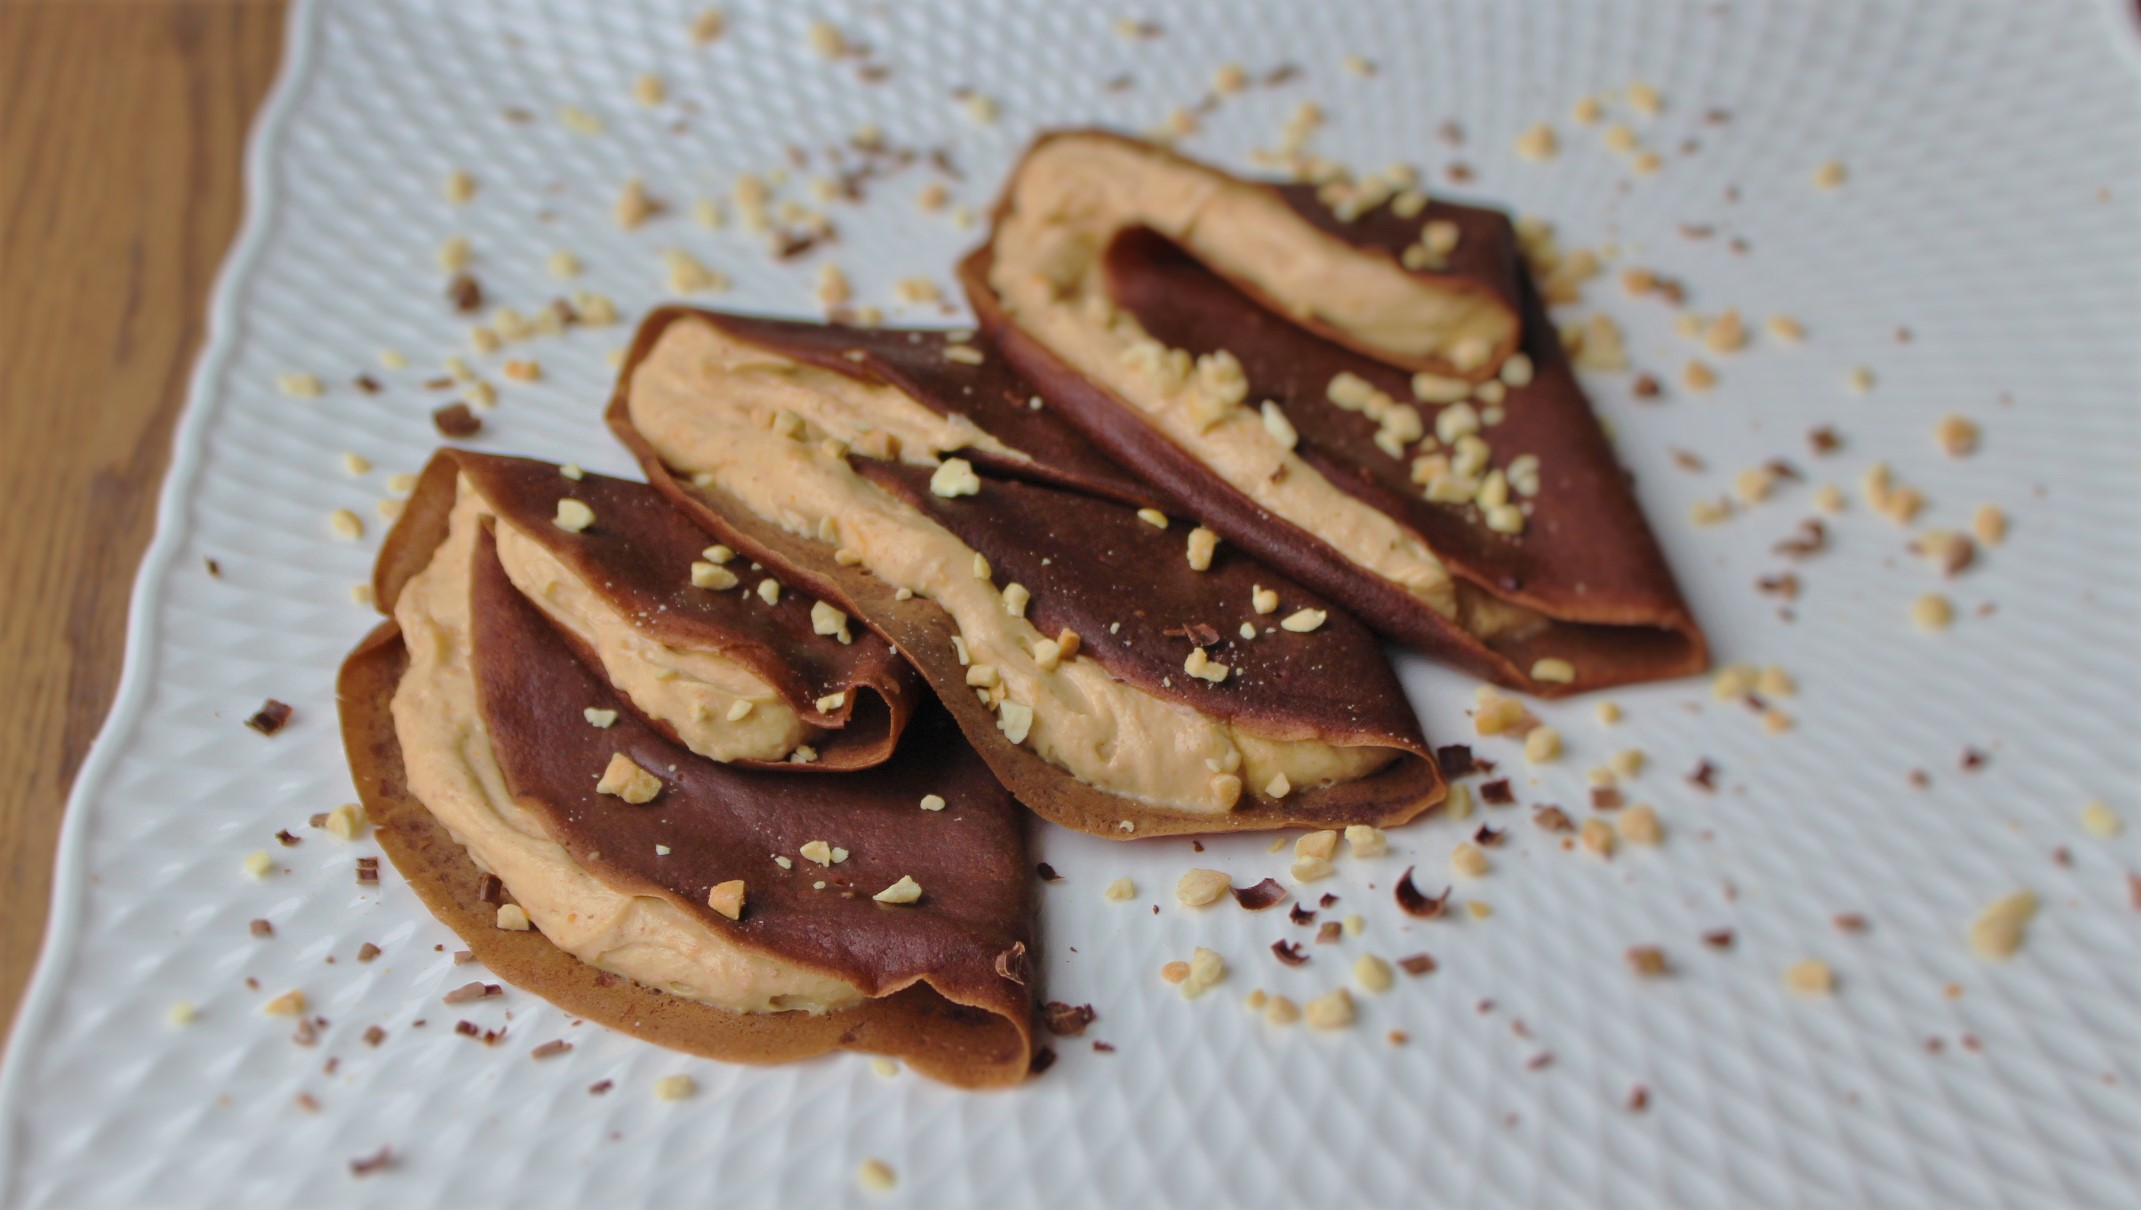 Chocolate Peanut Butter Crepes